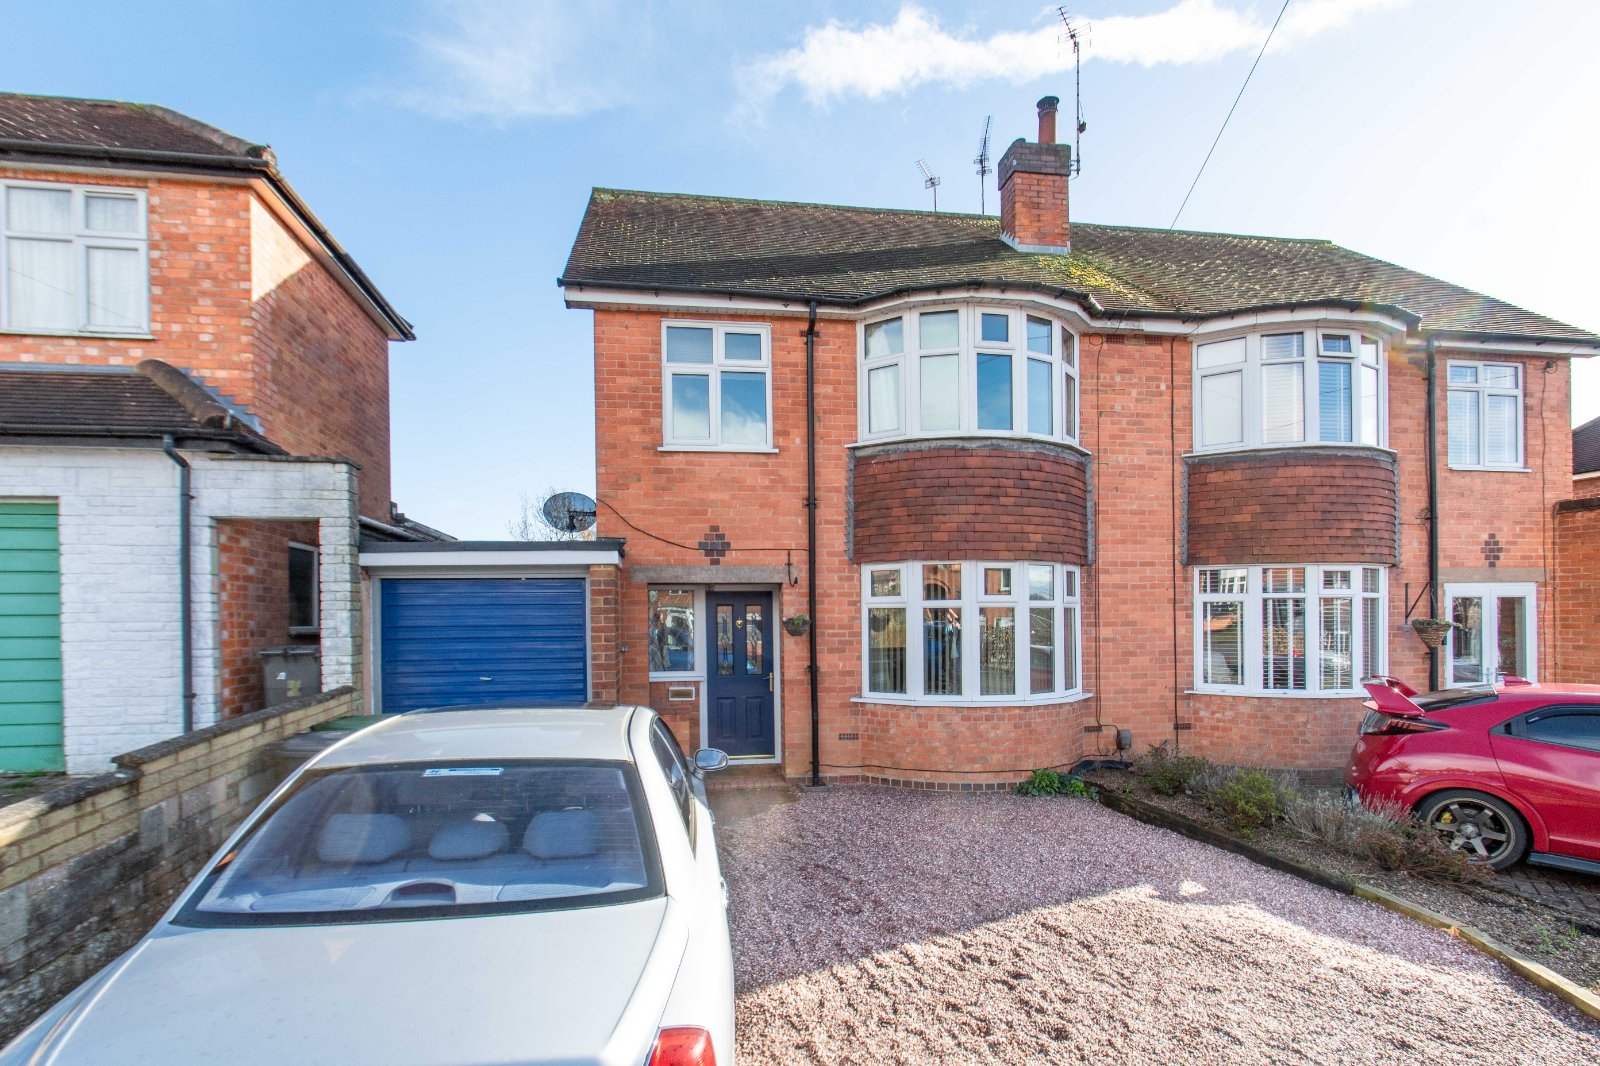 3 bed house for sale in Yvonne Road, Redditch - Property Image 1